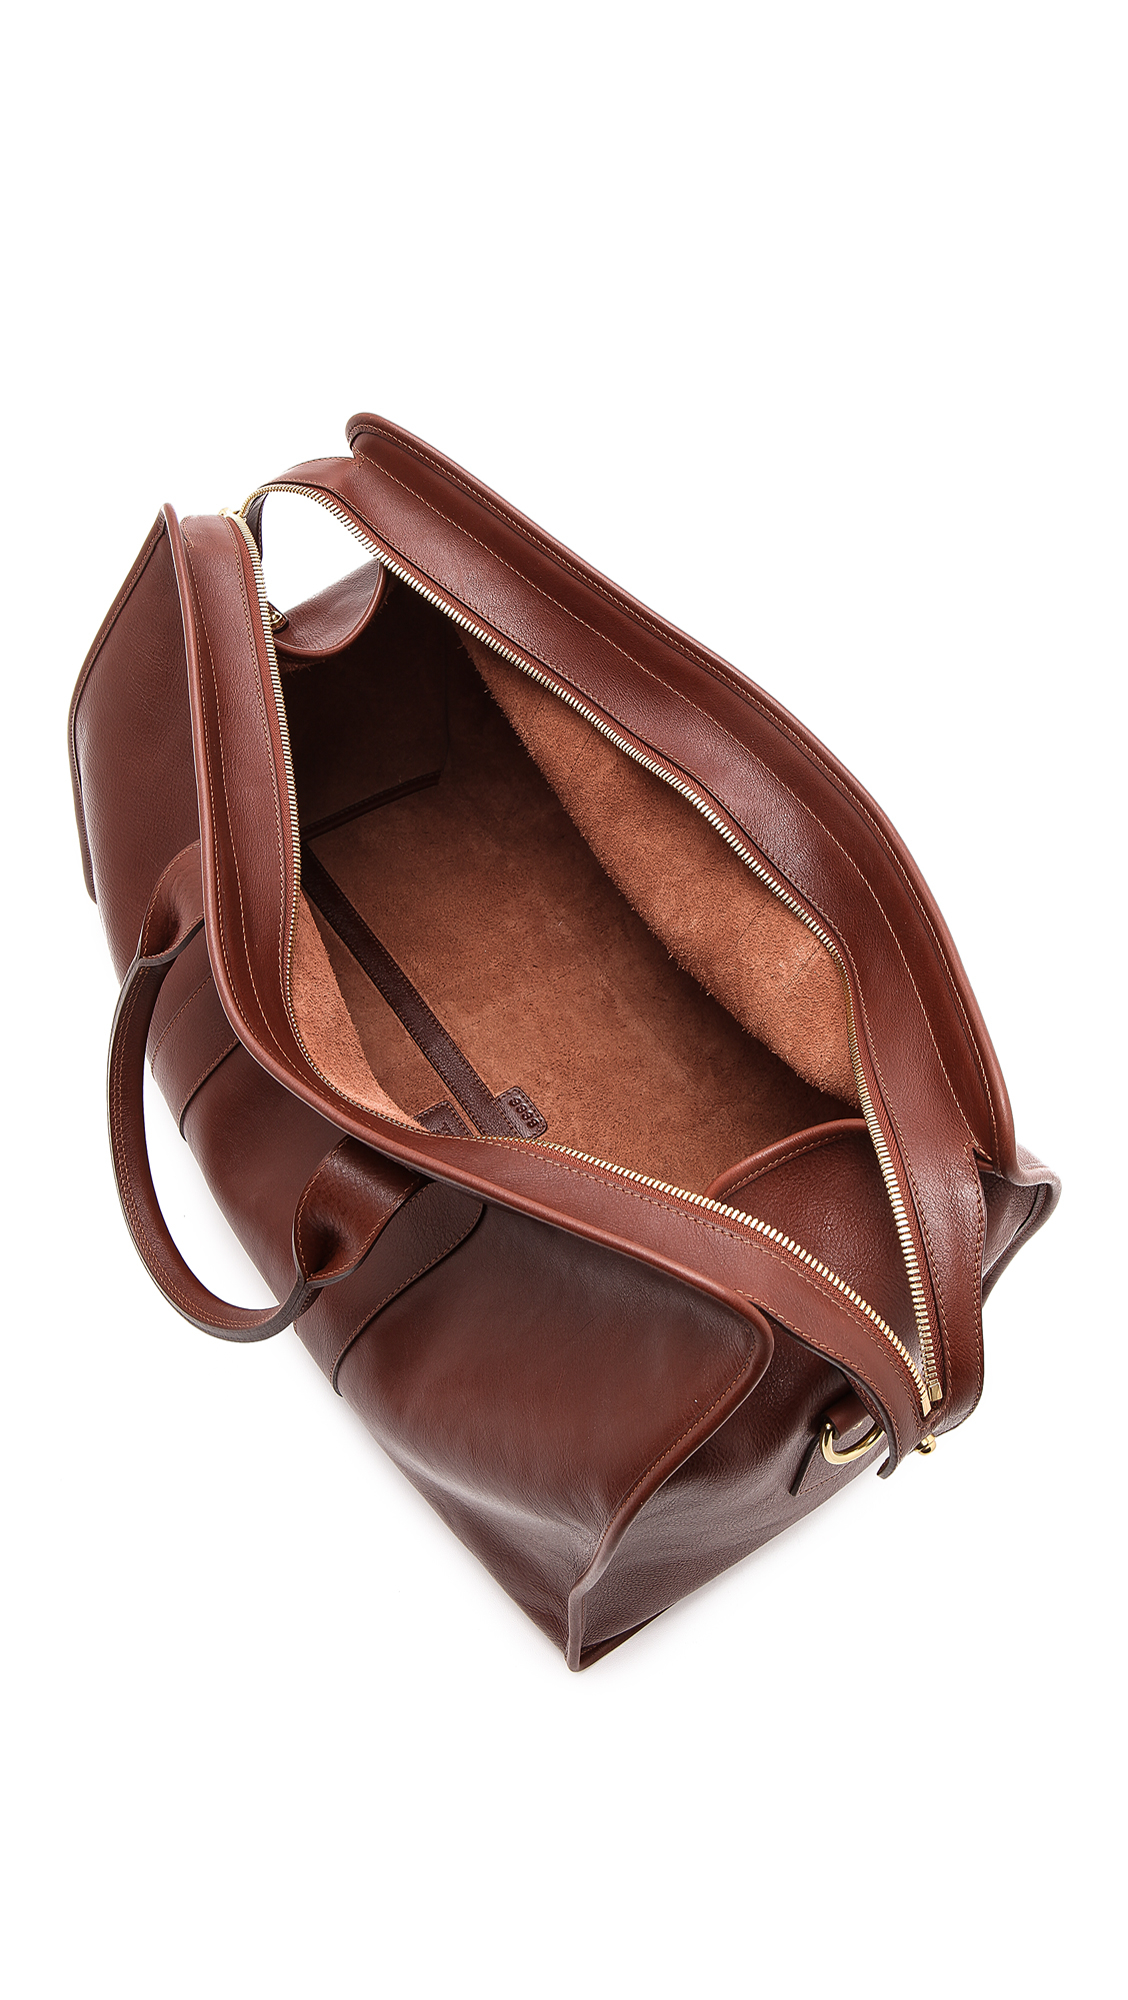 Lyst - Lotuff Leather Duffel Travel Bag in Brown for Men